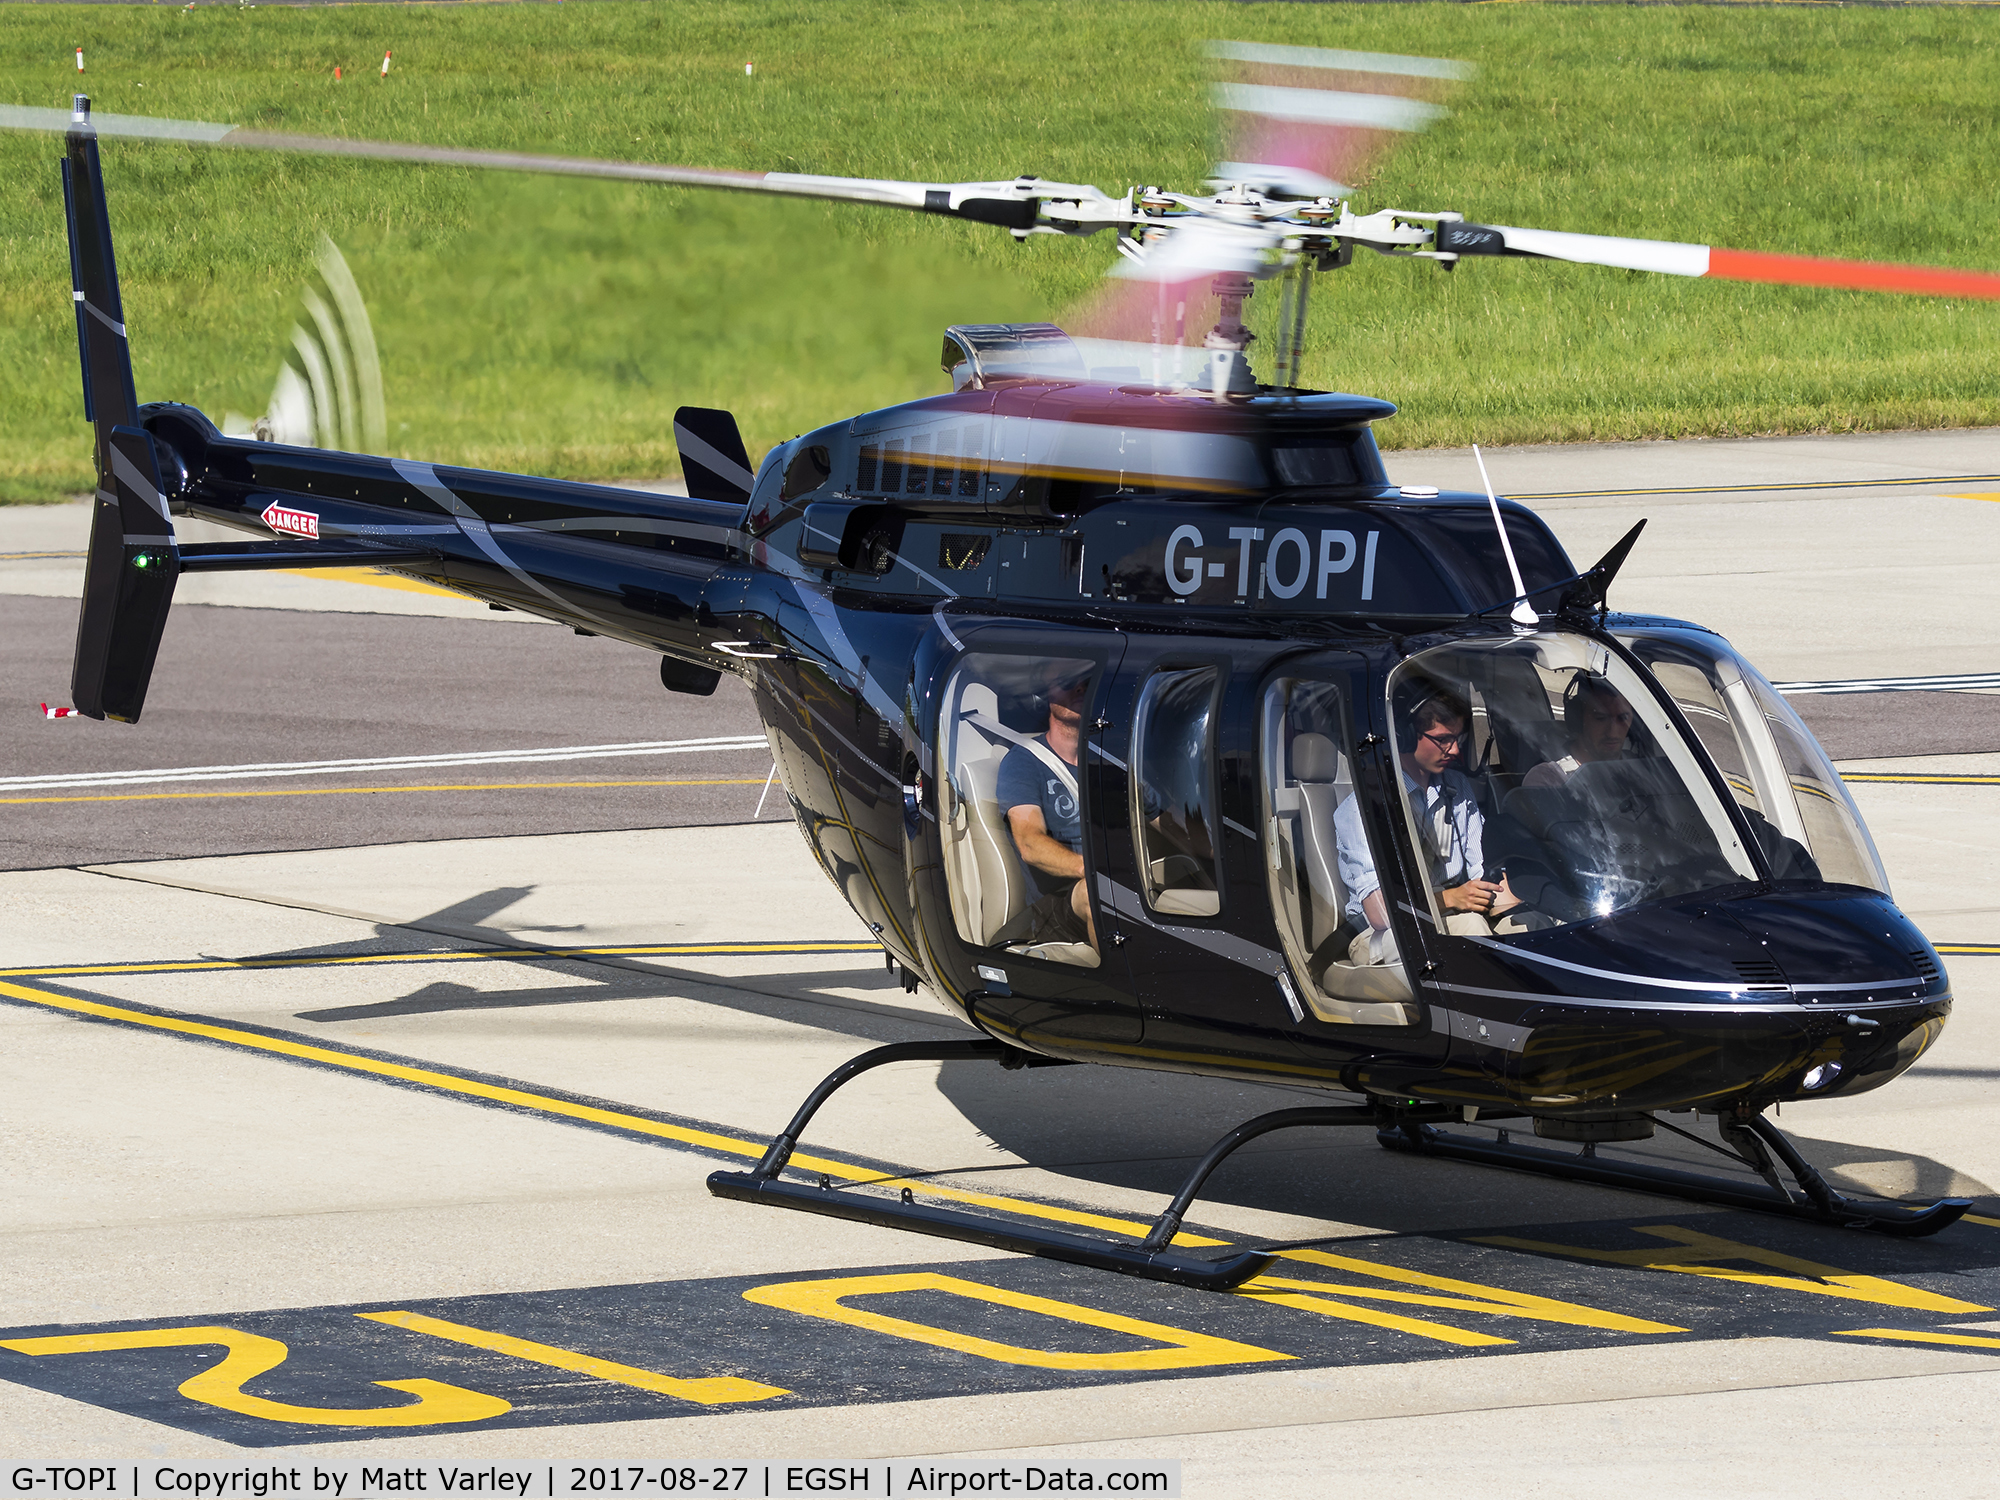 G-TOPI, 2015 Bell 407 C/N 54640, about to taxi